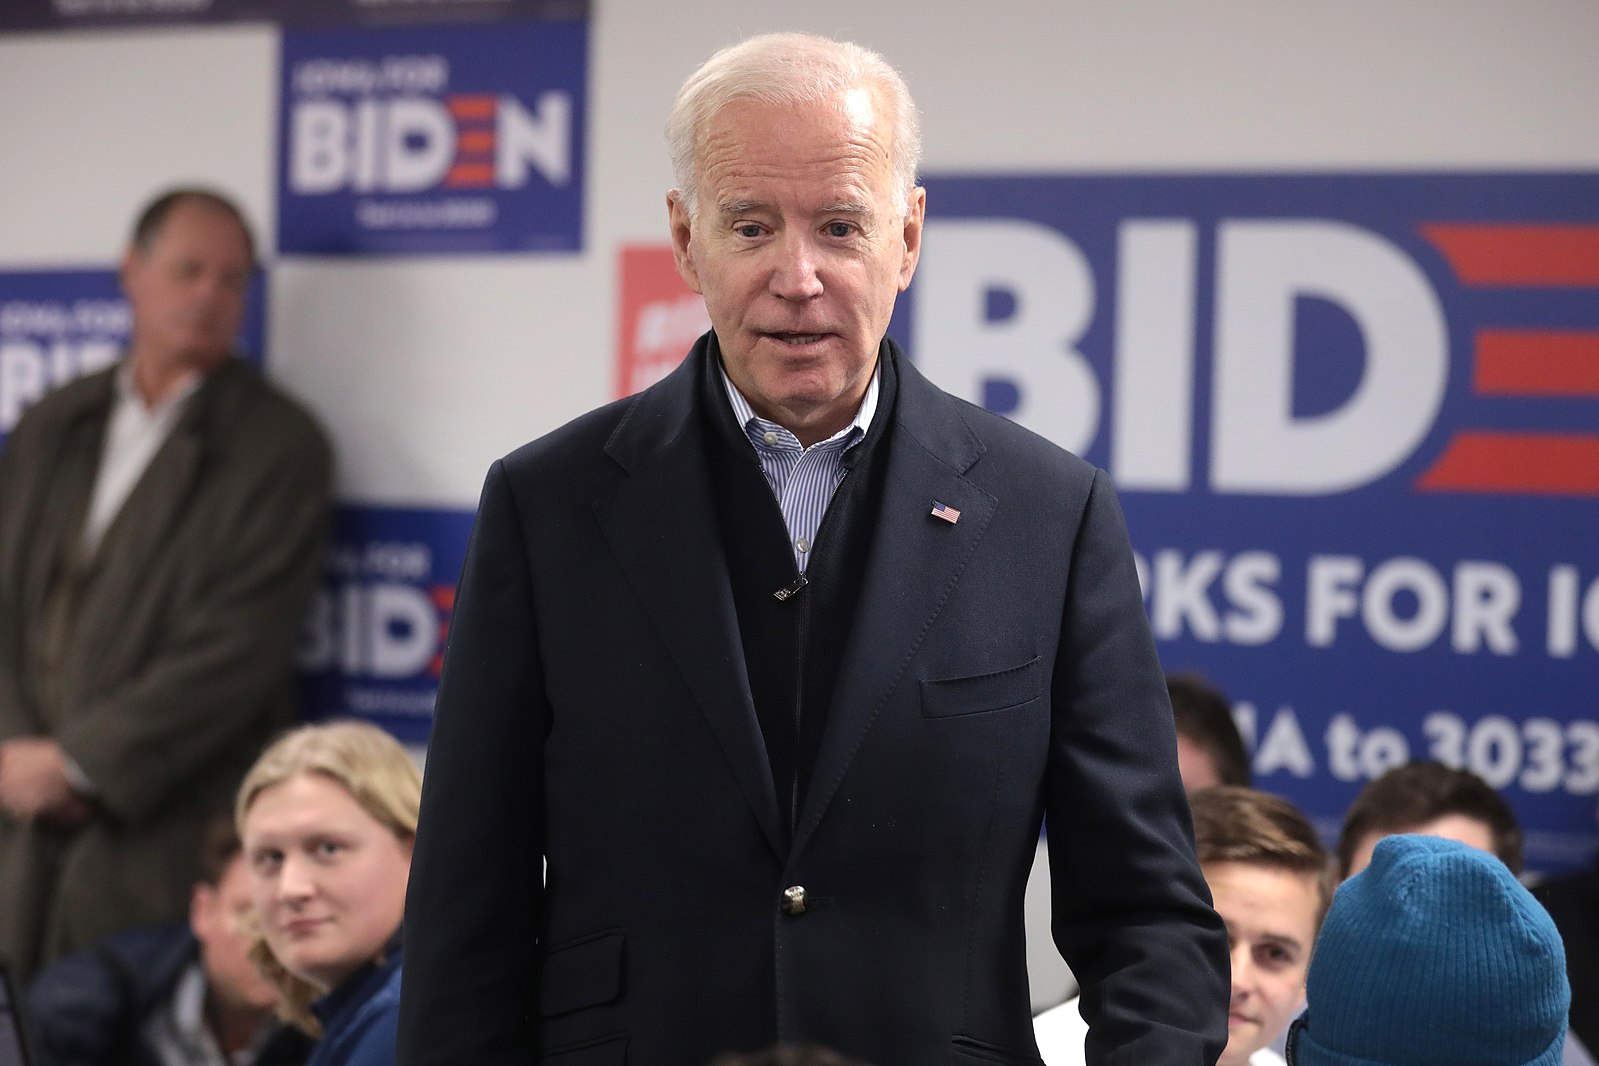 OPINION: Progressives can’t be complacent under a Biden administration